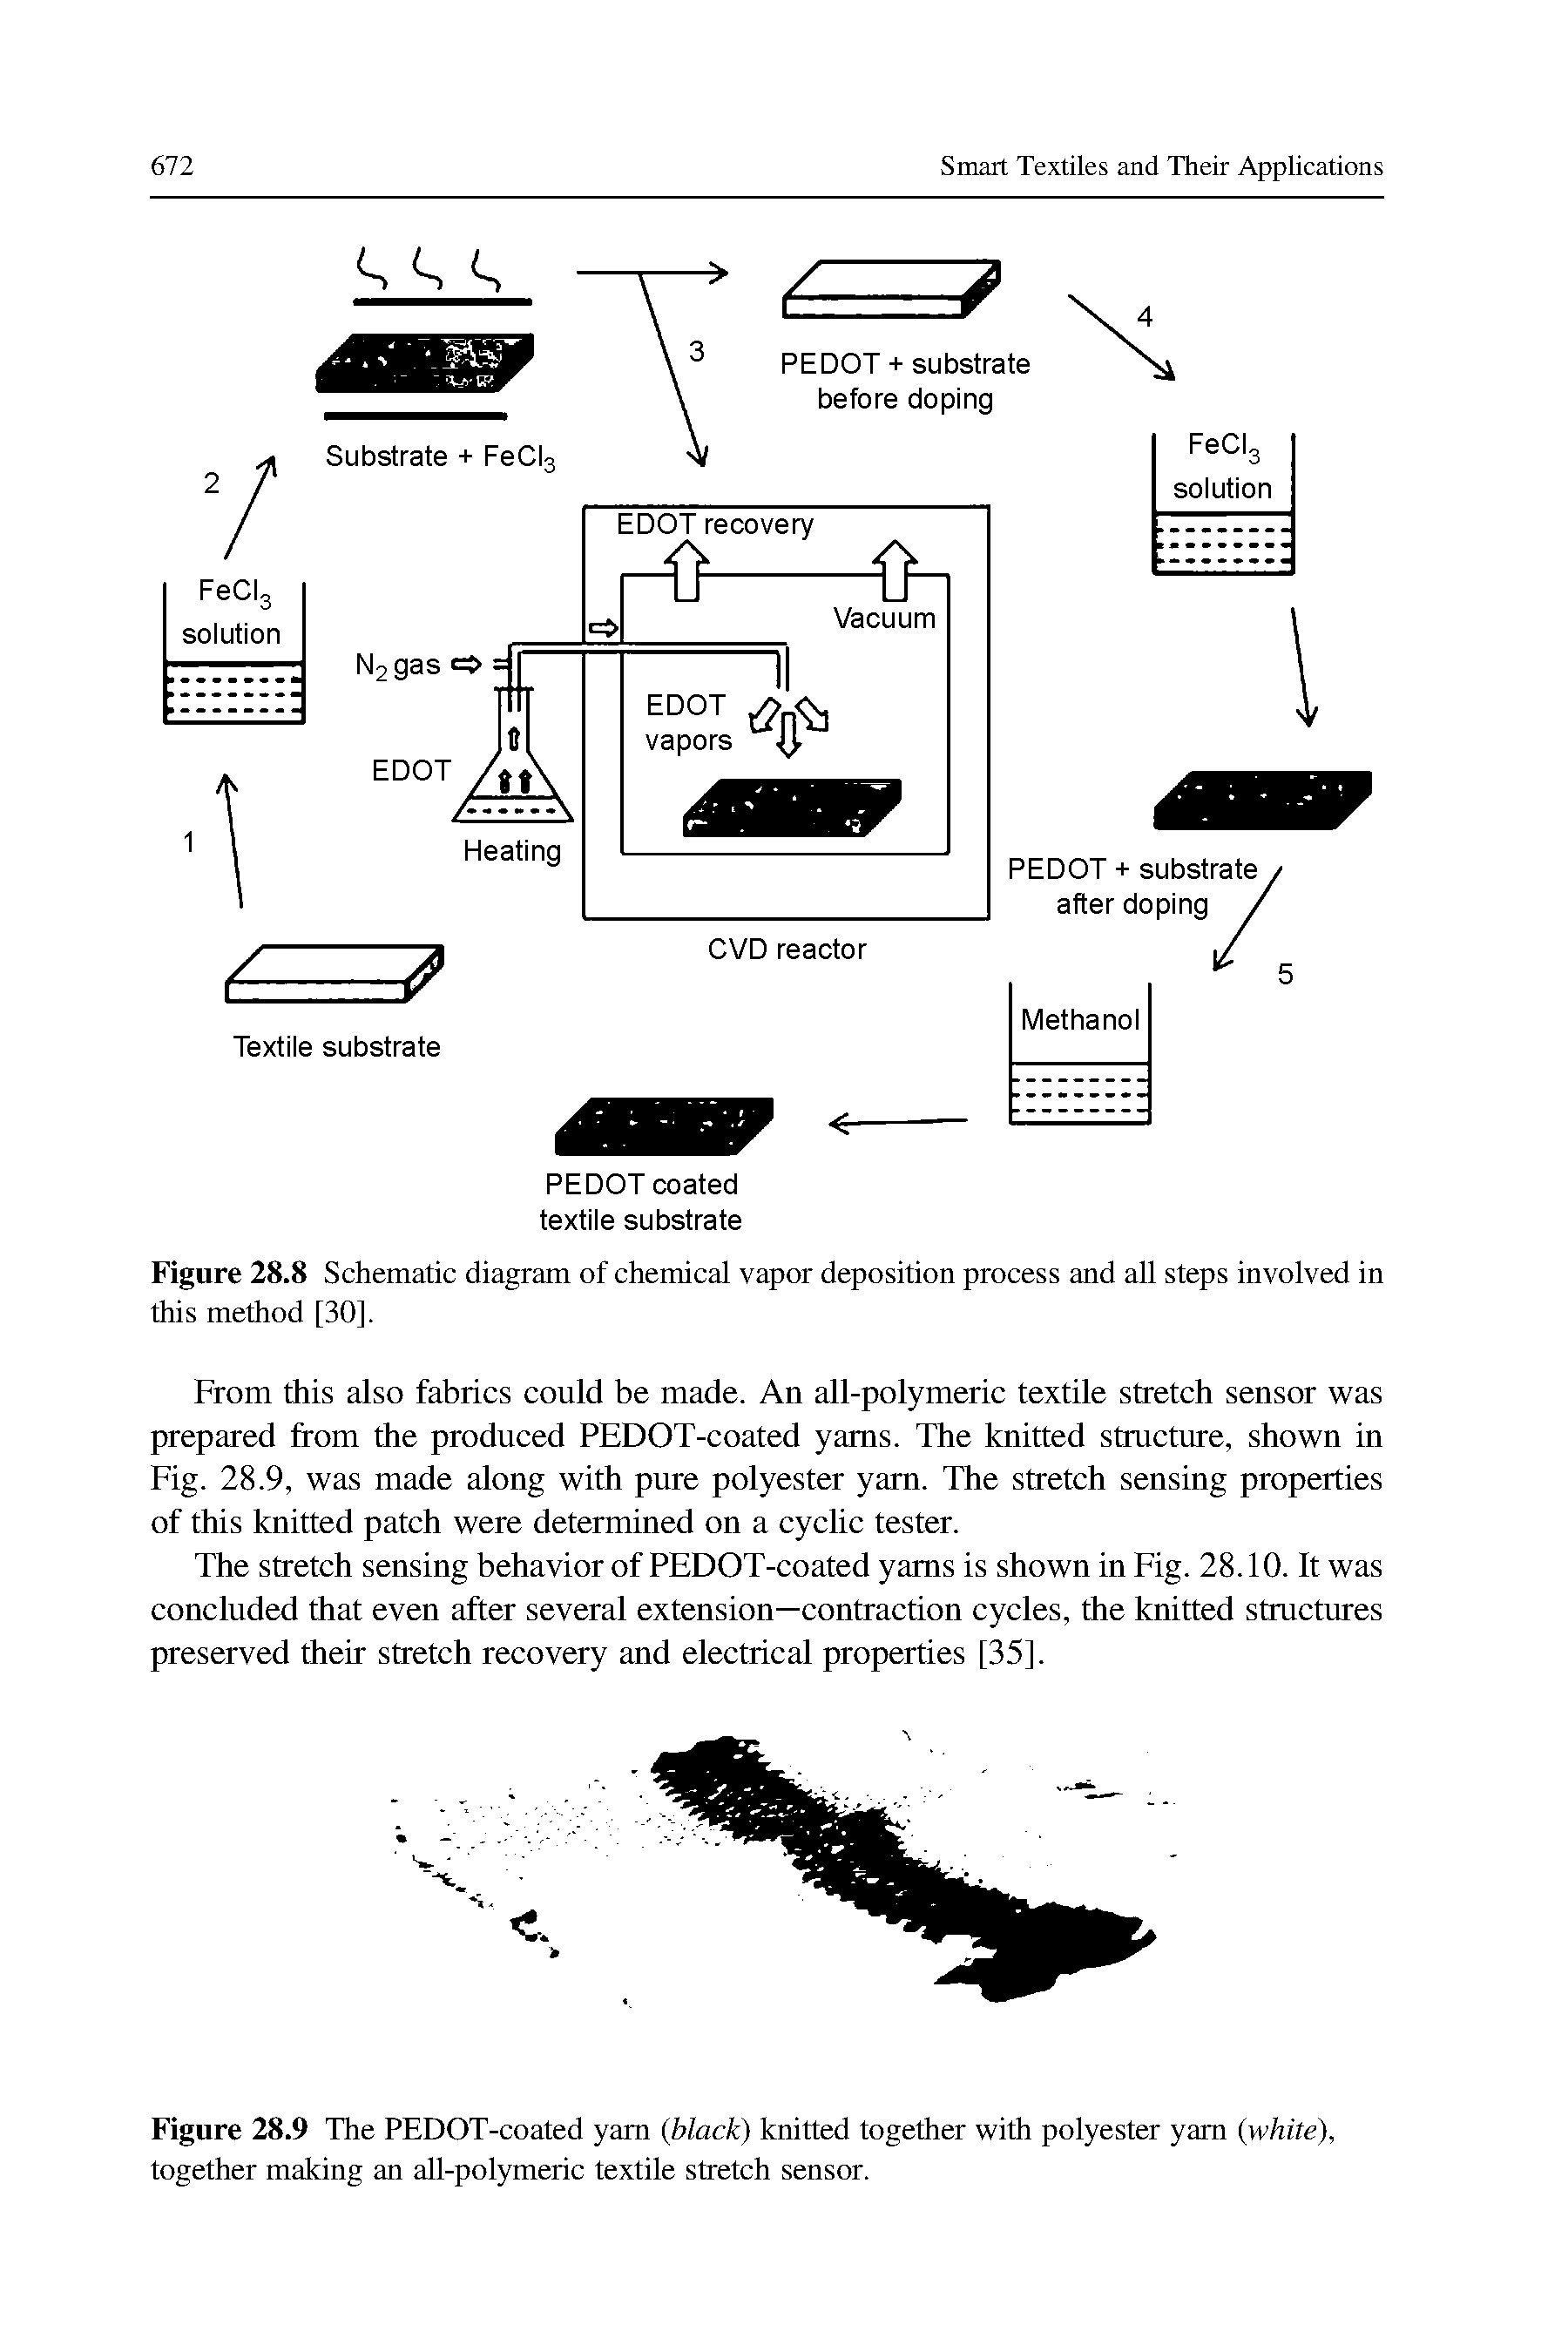 Figure 28.8 Schematic diagram of chemical vapor deposition process and all steps involved in this method [30].